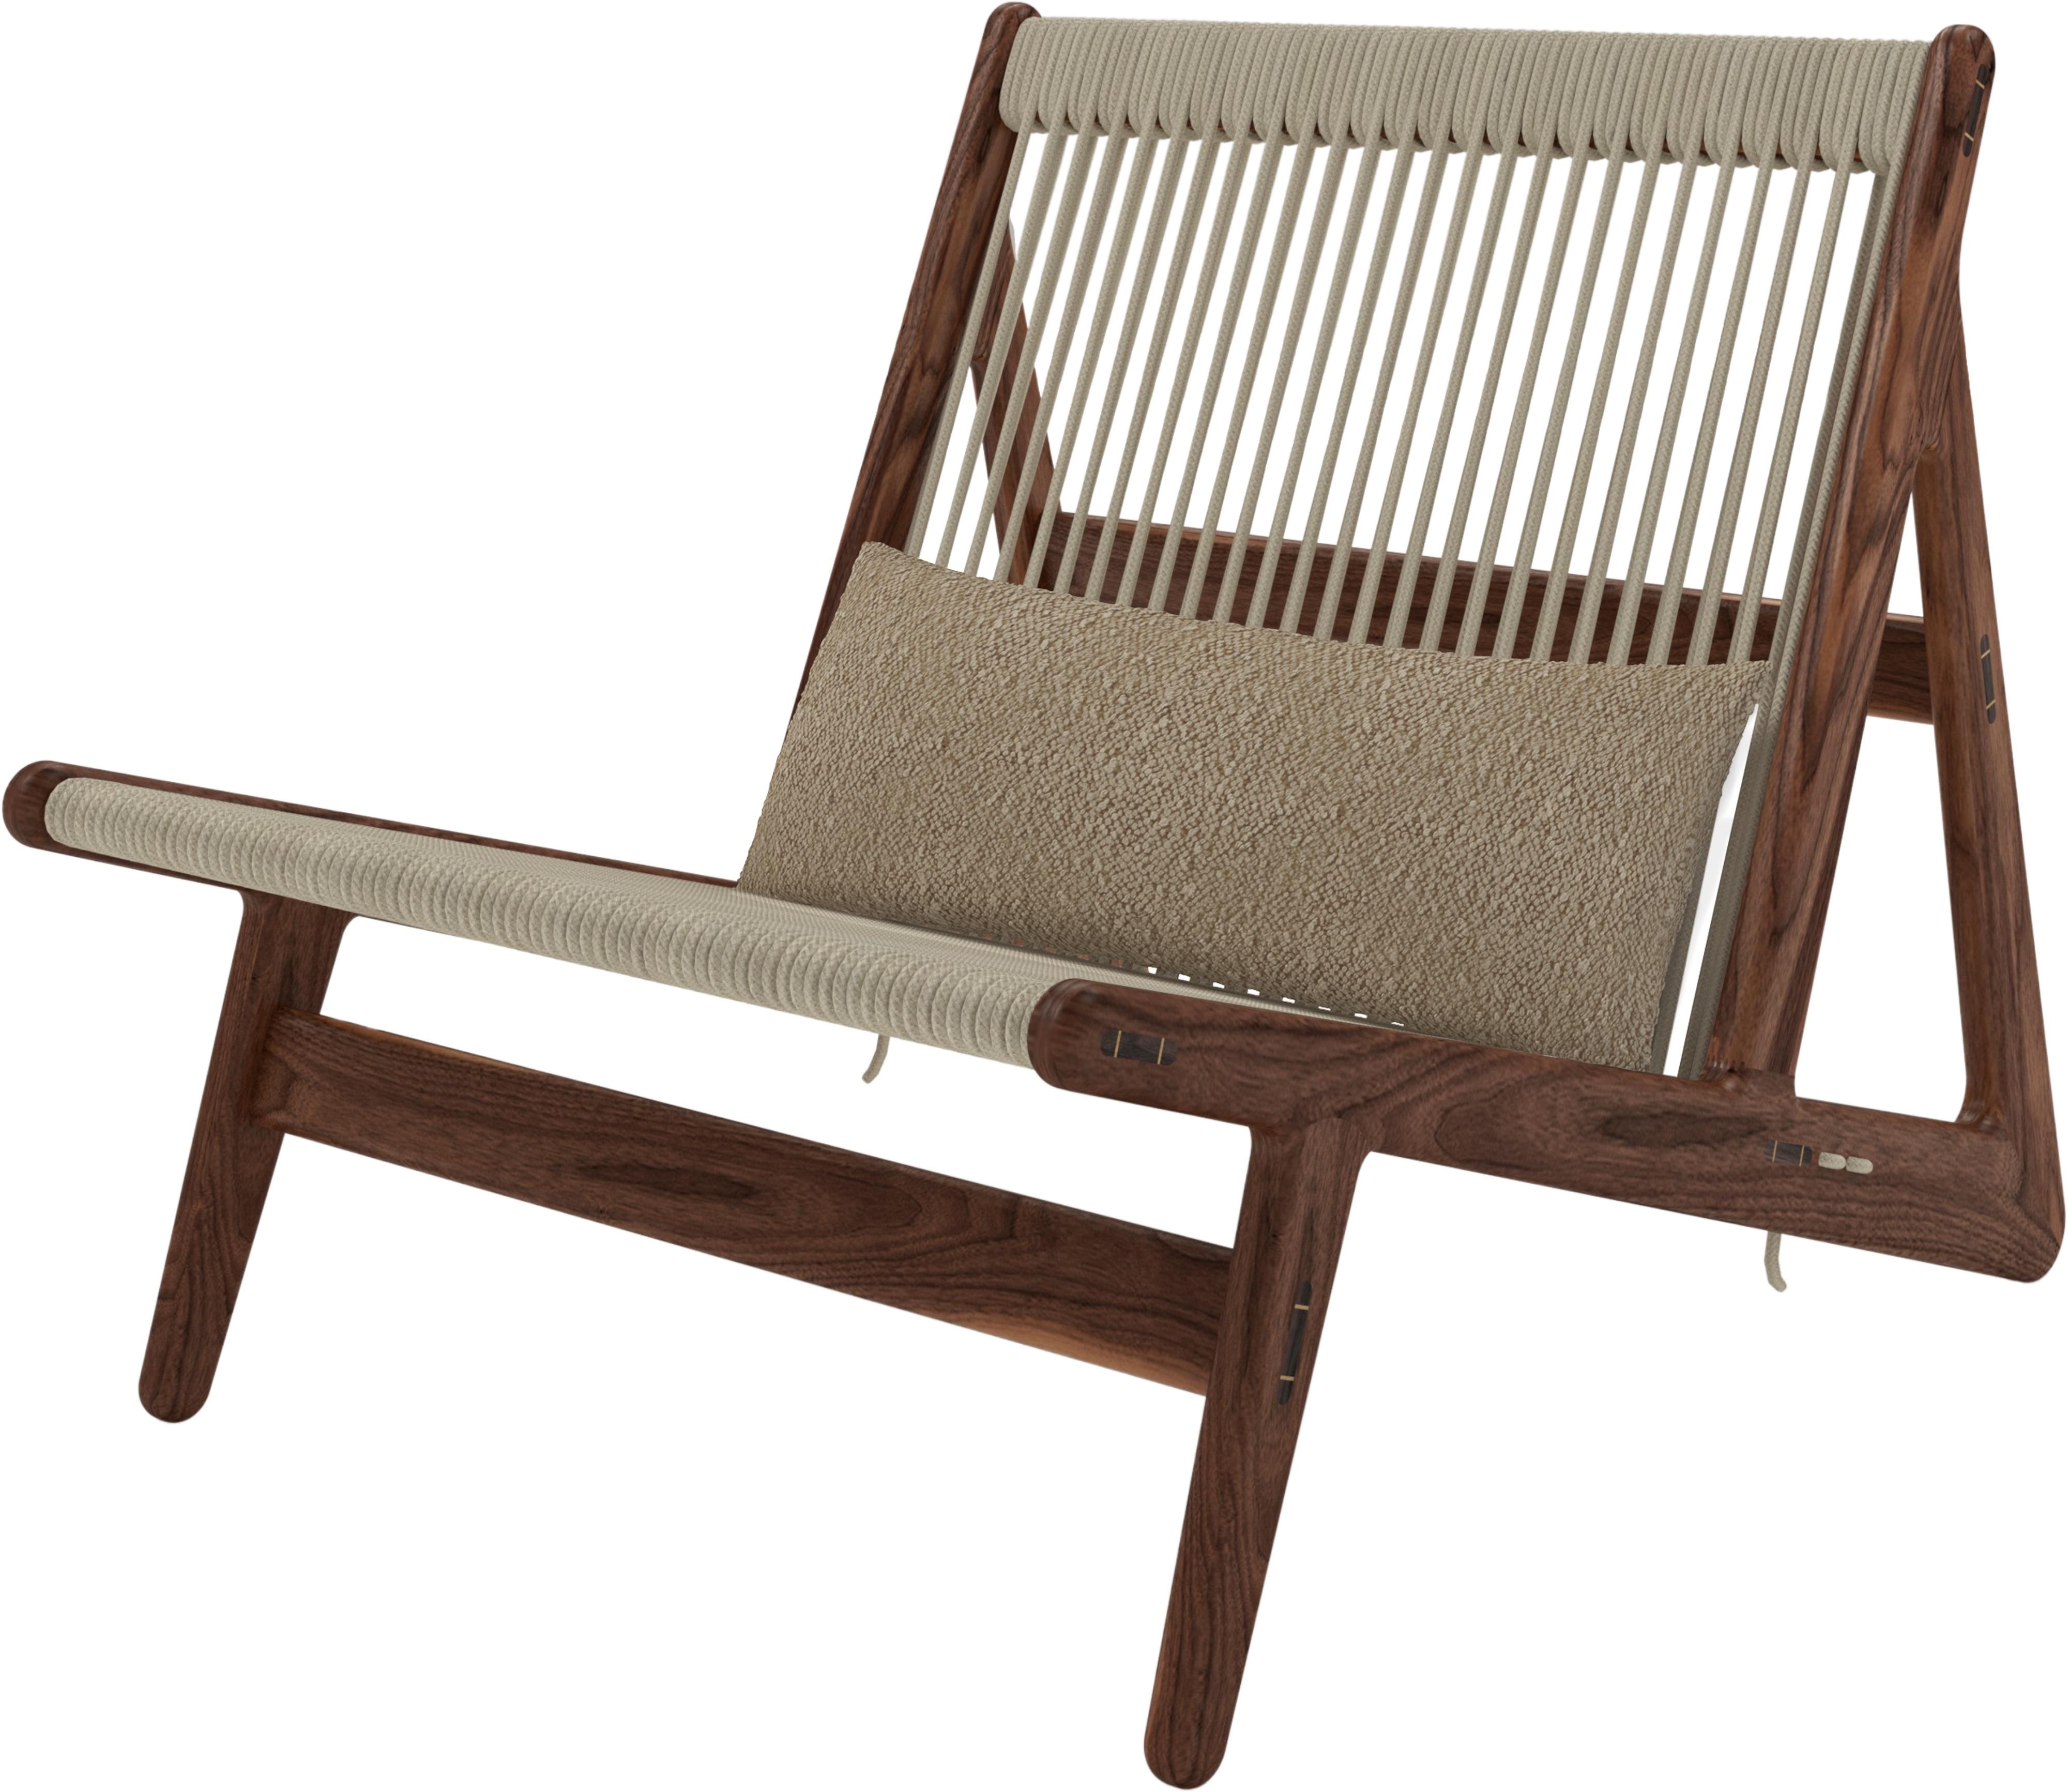 Rasmussen MR01 Initial Chair in Walnut for Gubi In New Condition For Sale In Glendale, CA